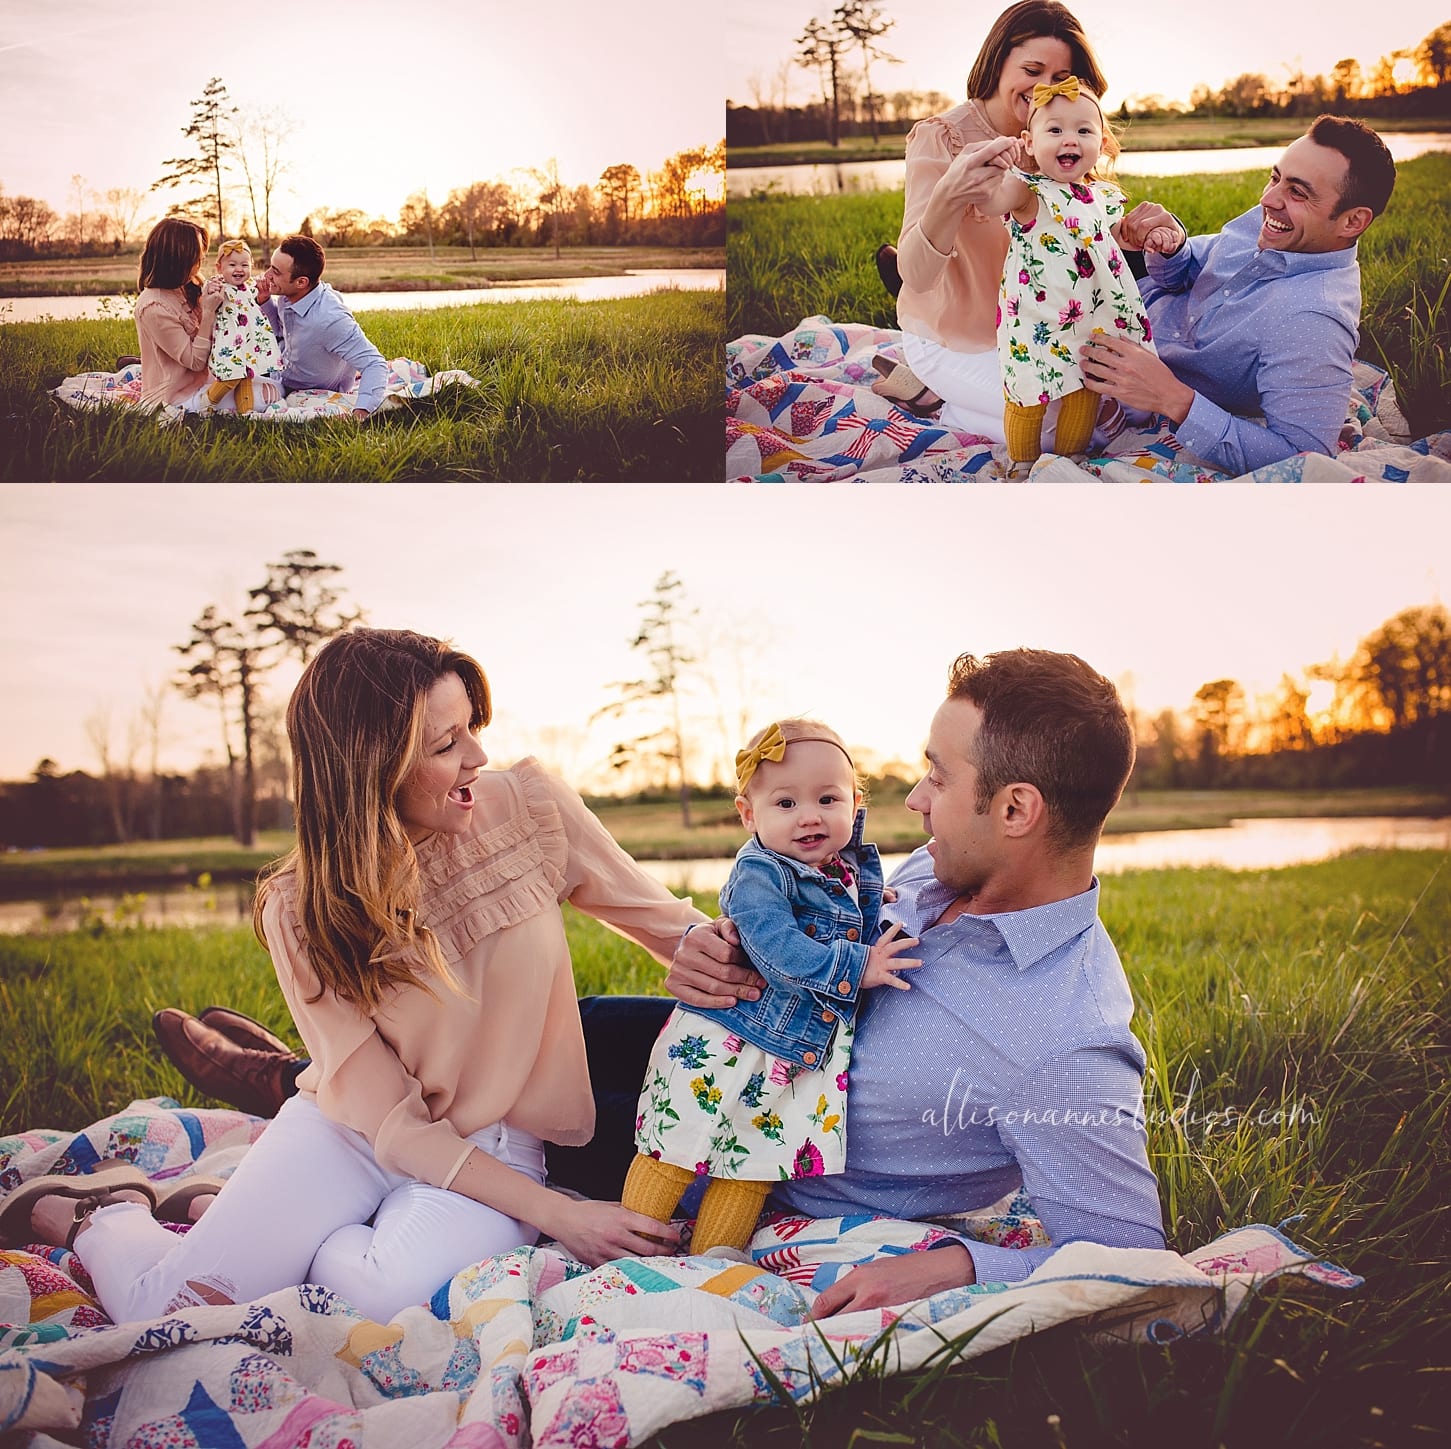 Ellie, sunset, best family photographer in South Jersey, happy family, white horse winery, chilly day, natural lighting, faithful customers, parenting, love, Hammonton, AllisonAnne Studios, Allison Gallagher